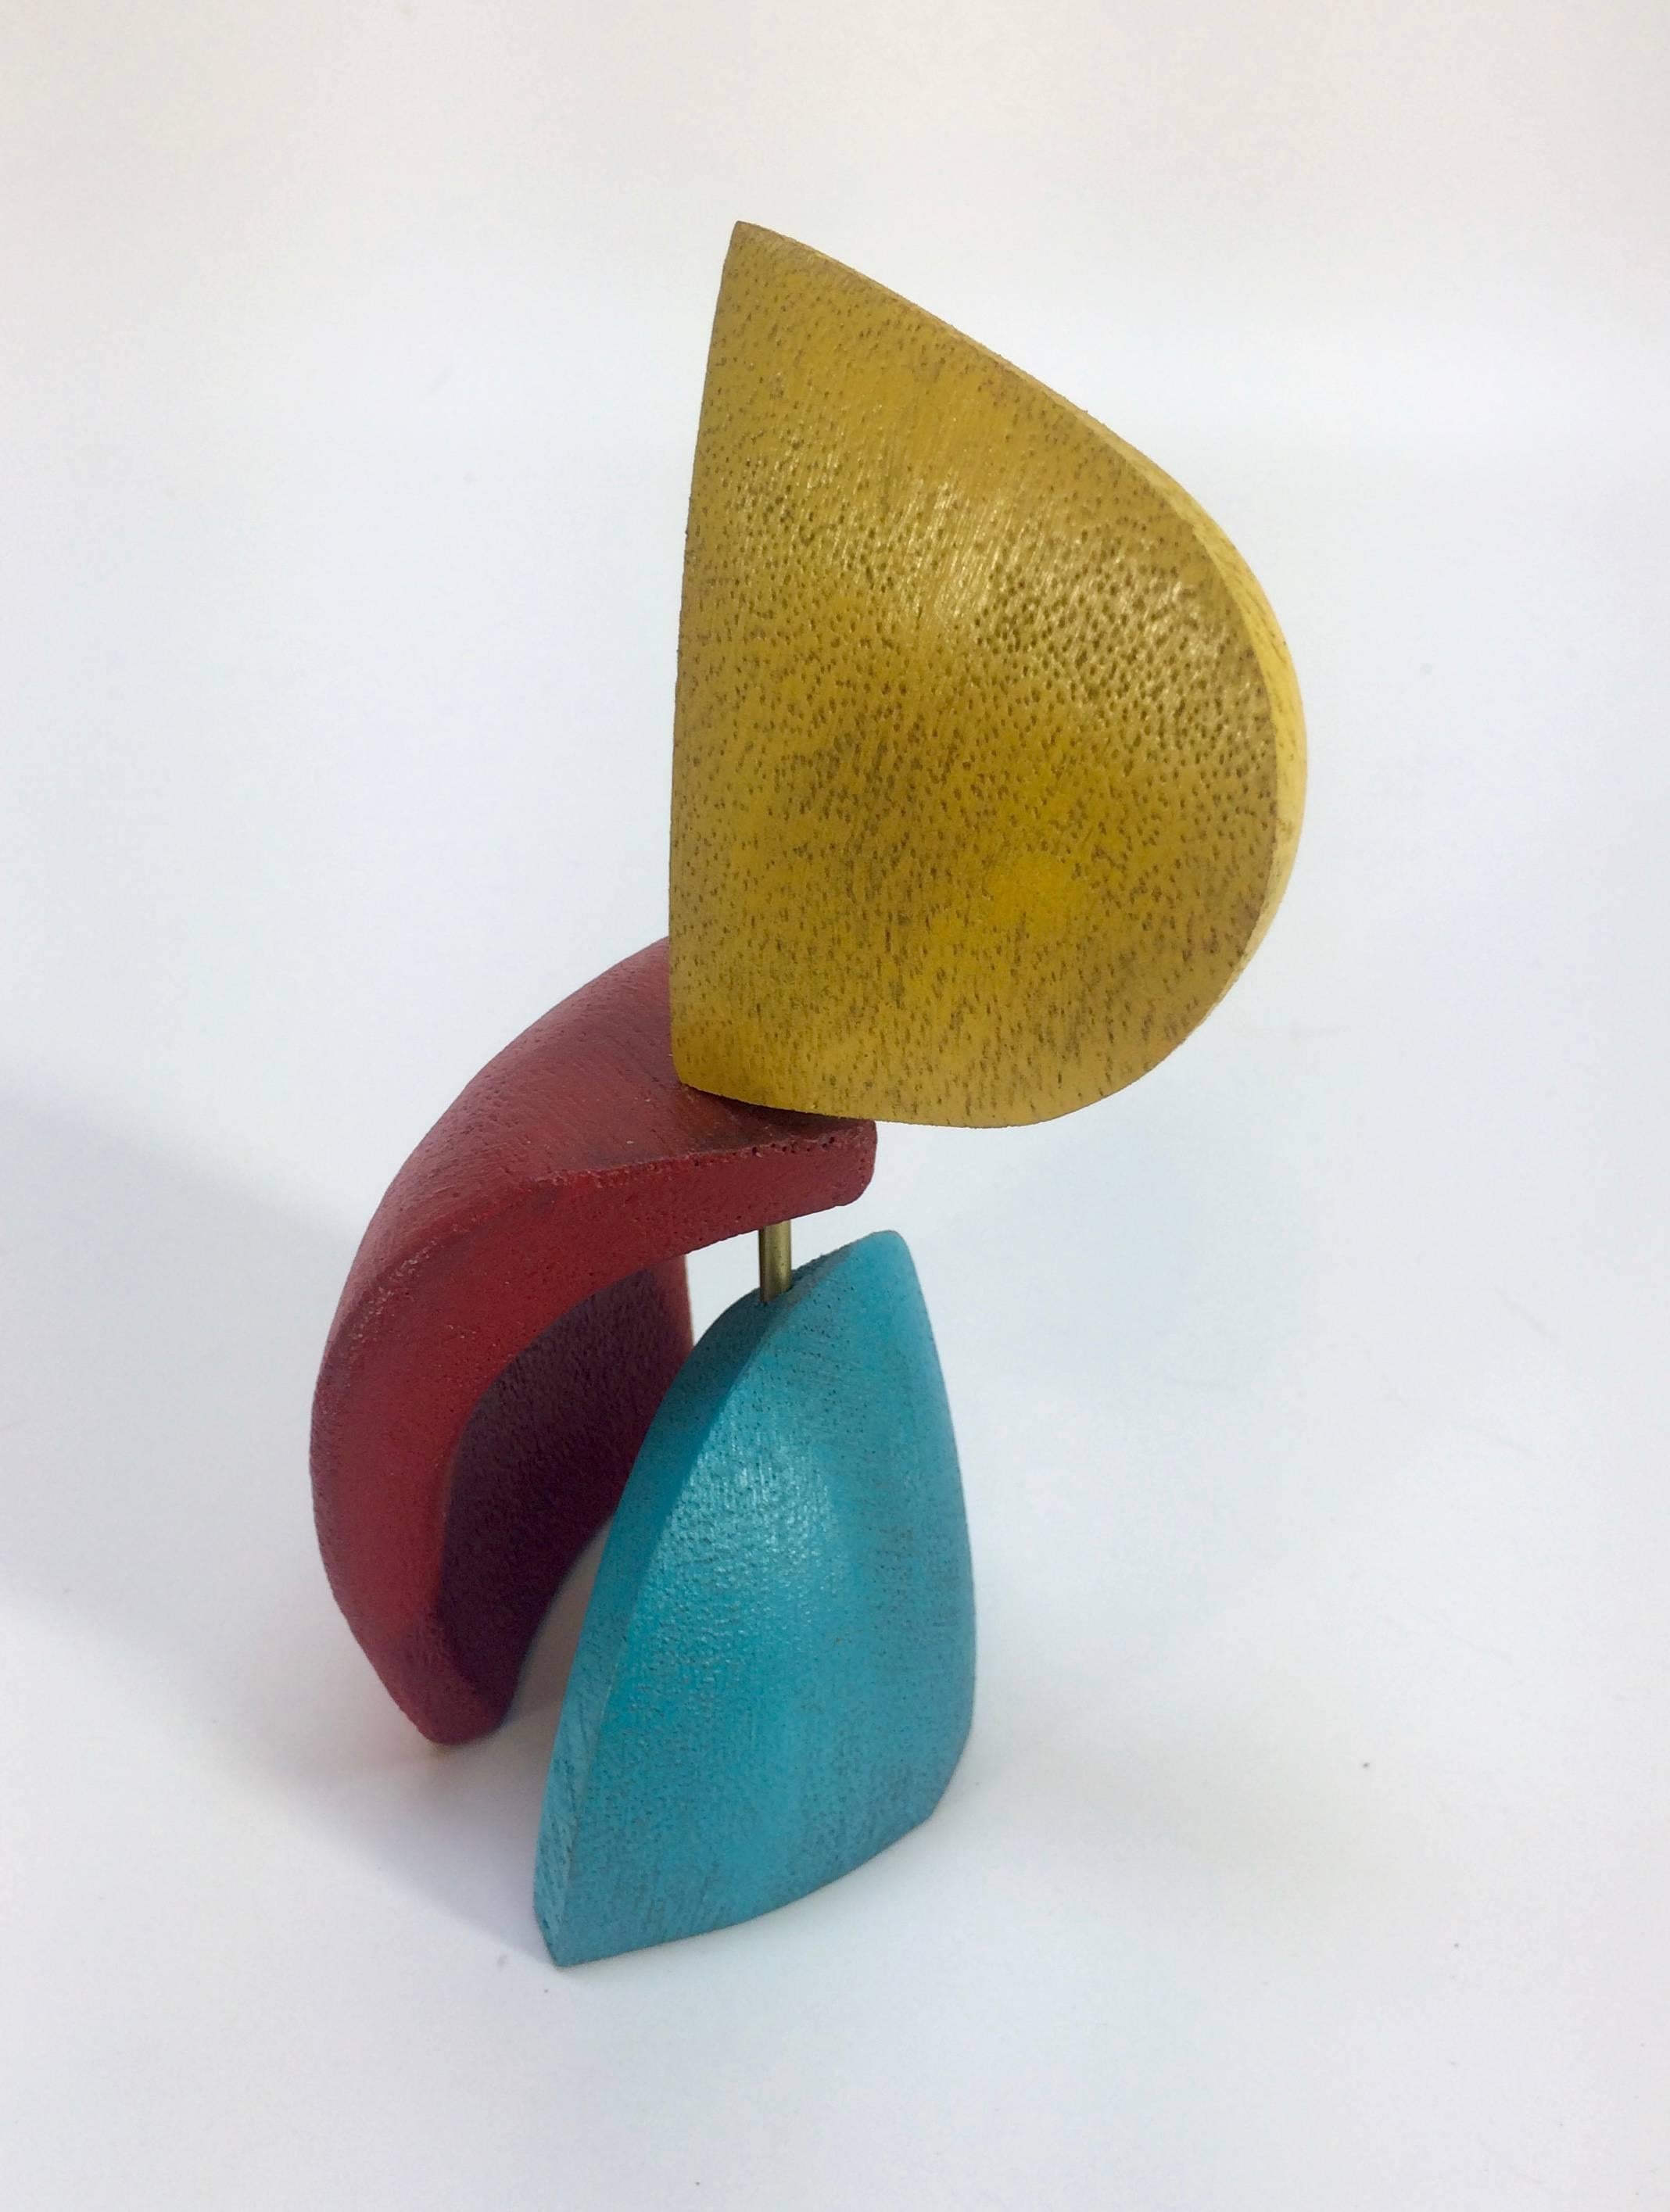 Primary colors abstract sculpture by Adam Henderson. One of Henderson's simplest but elegant pieces exhibits strength through the strong coloration.